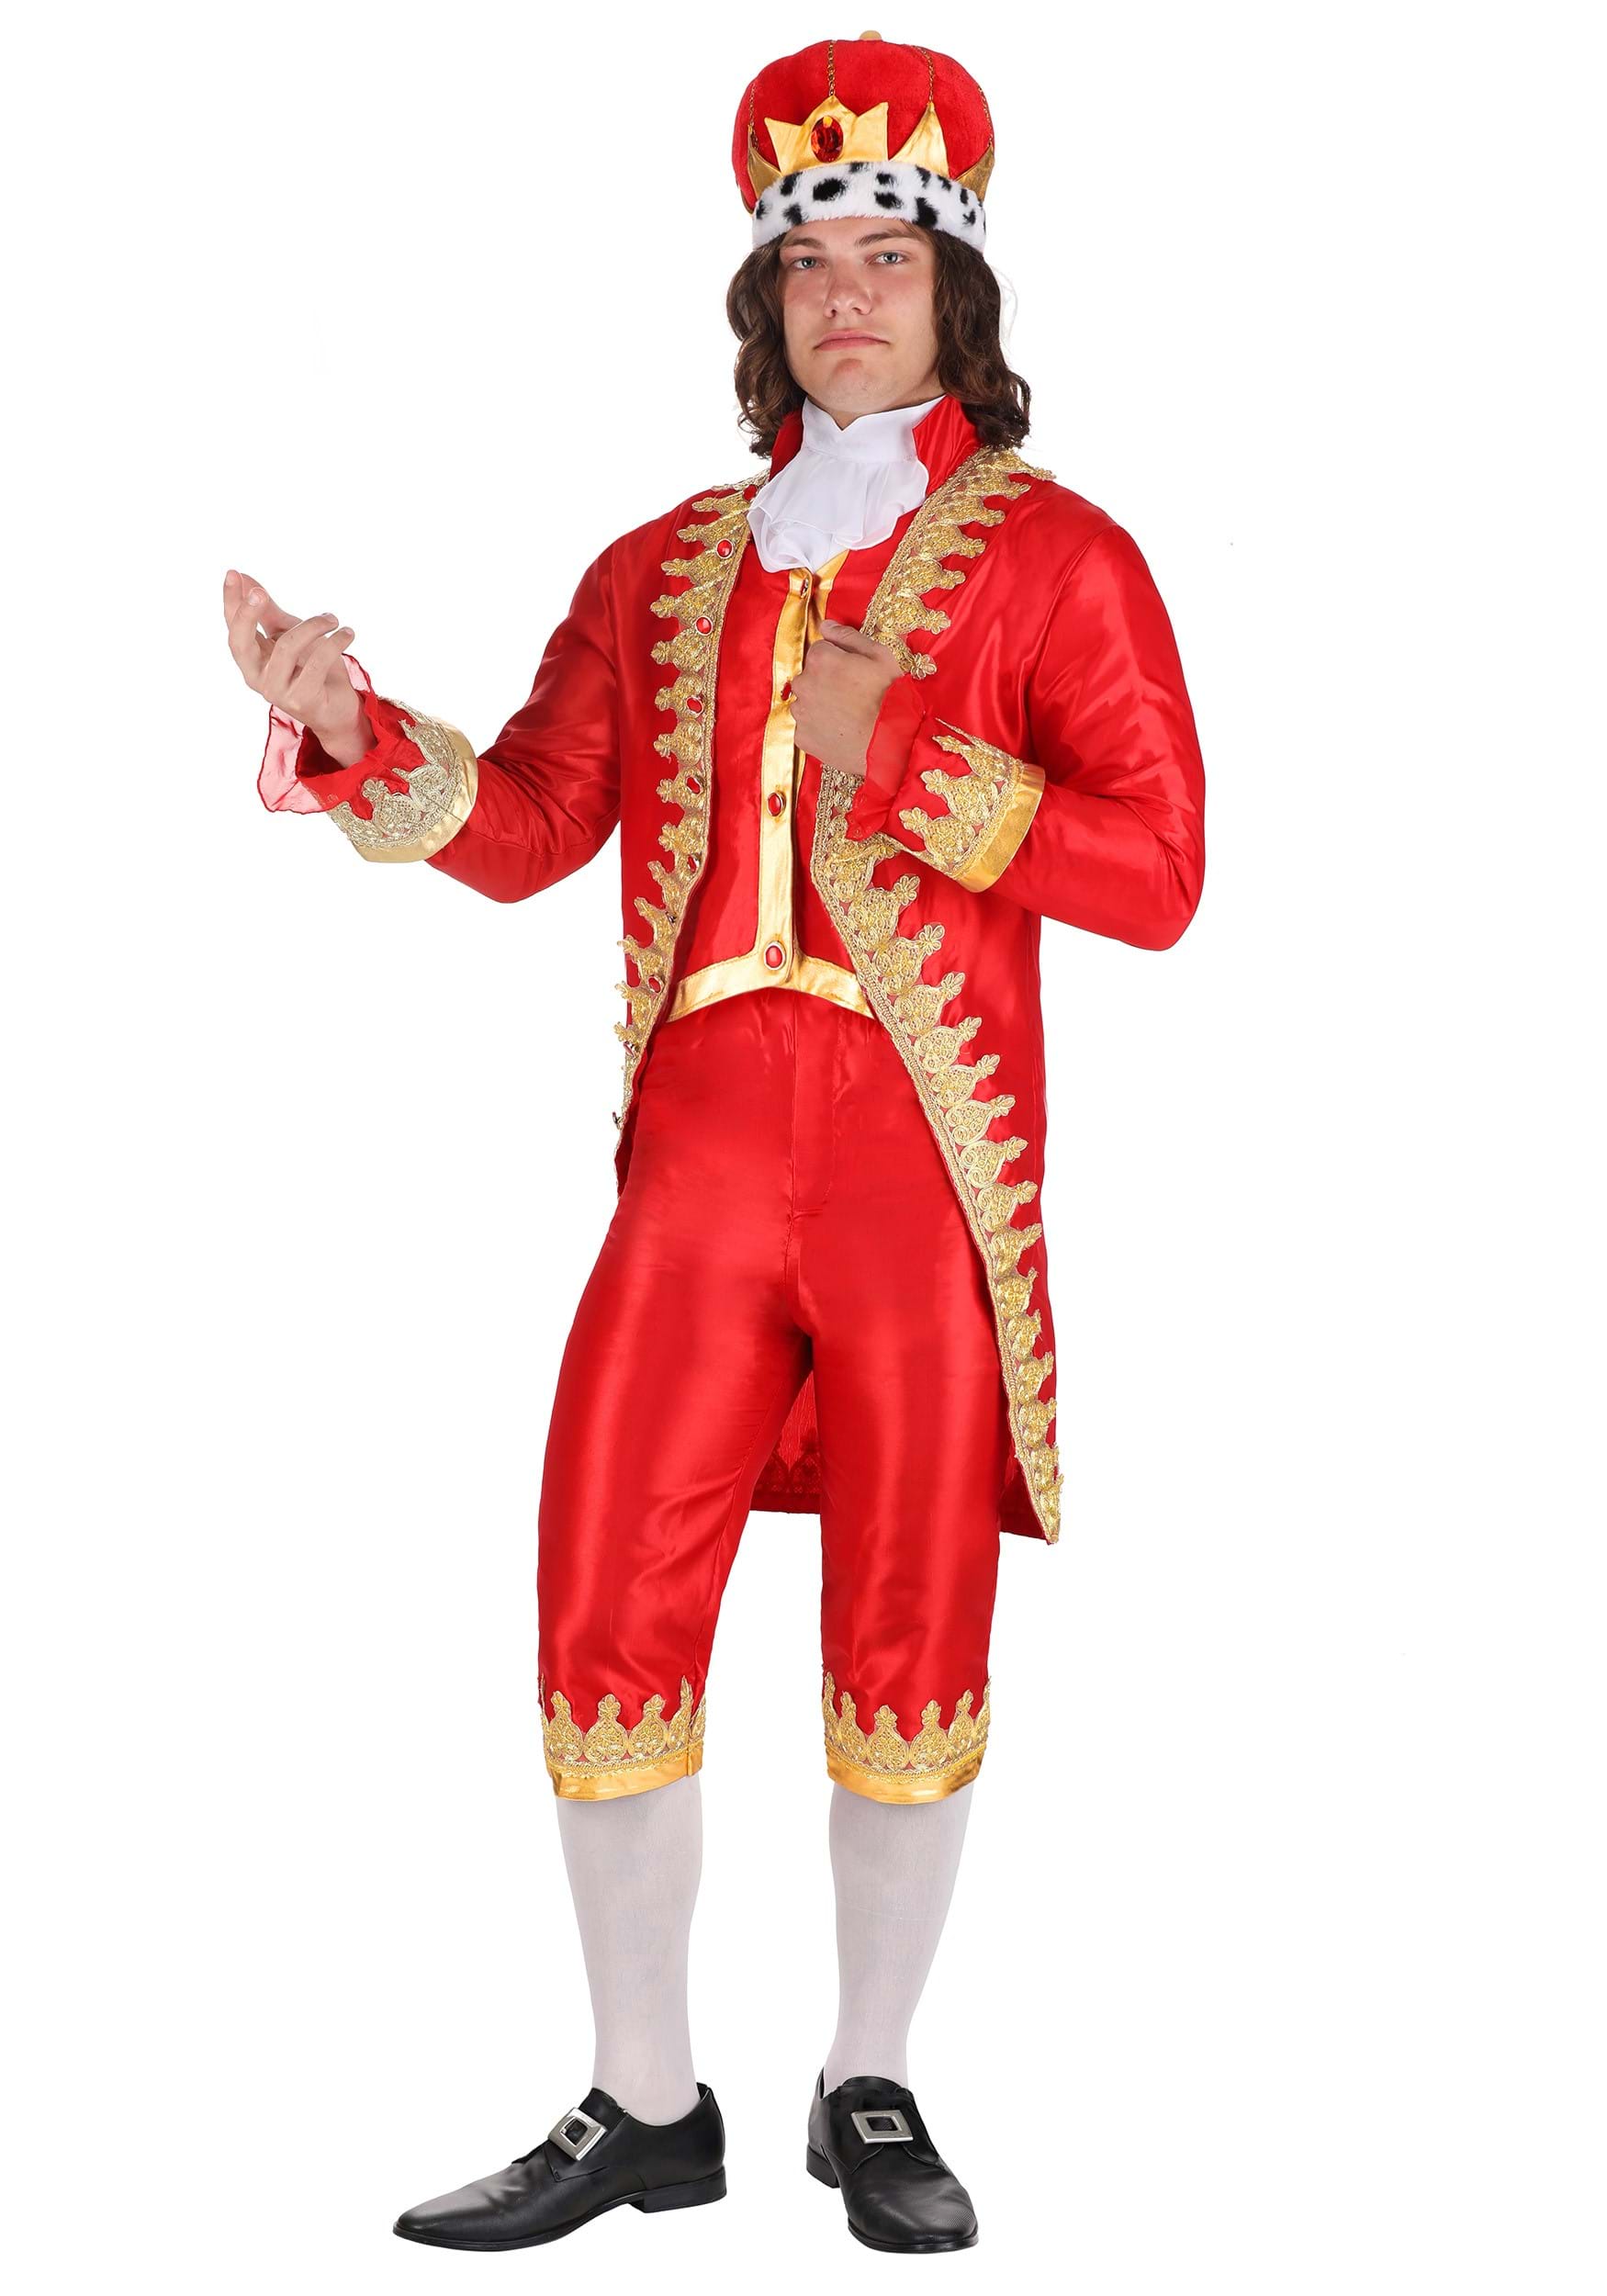 Image of Adult King George Costume | Men's Historical Costumes ID FUN6576AD-S